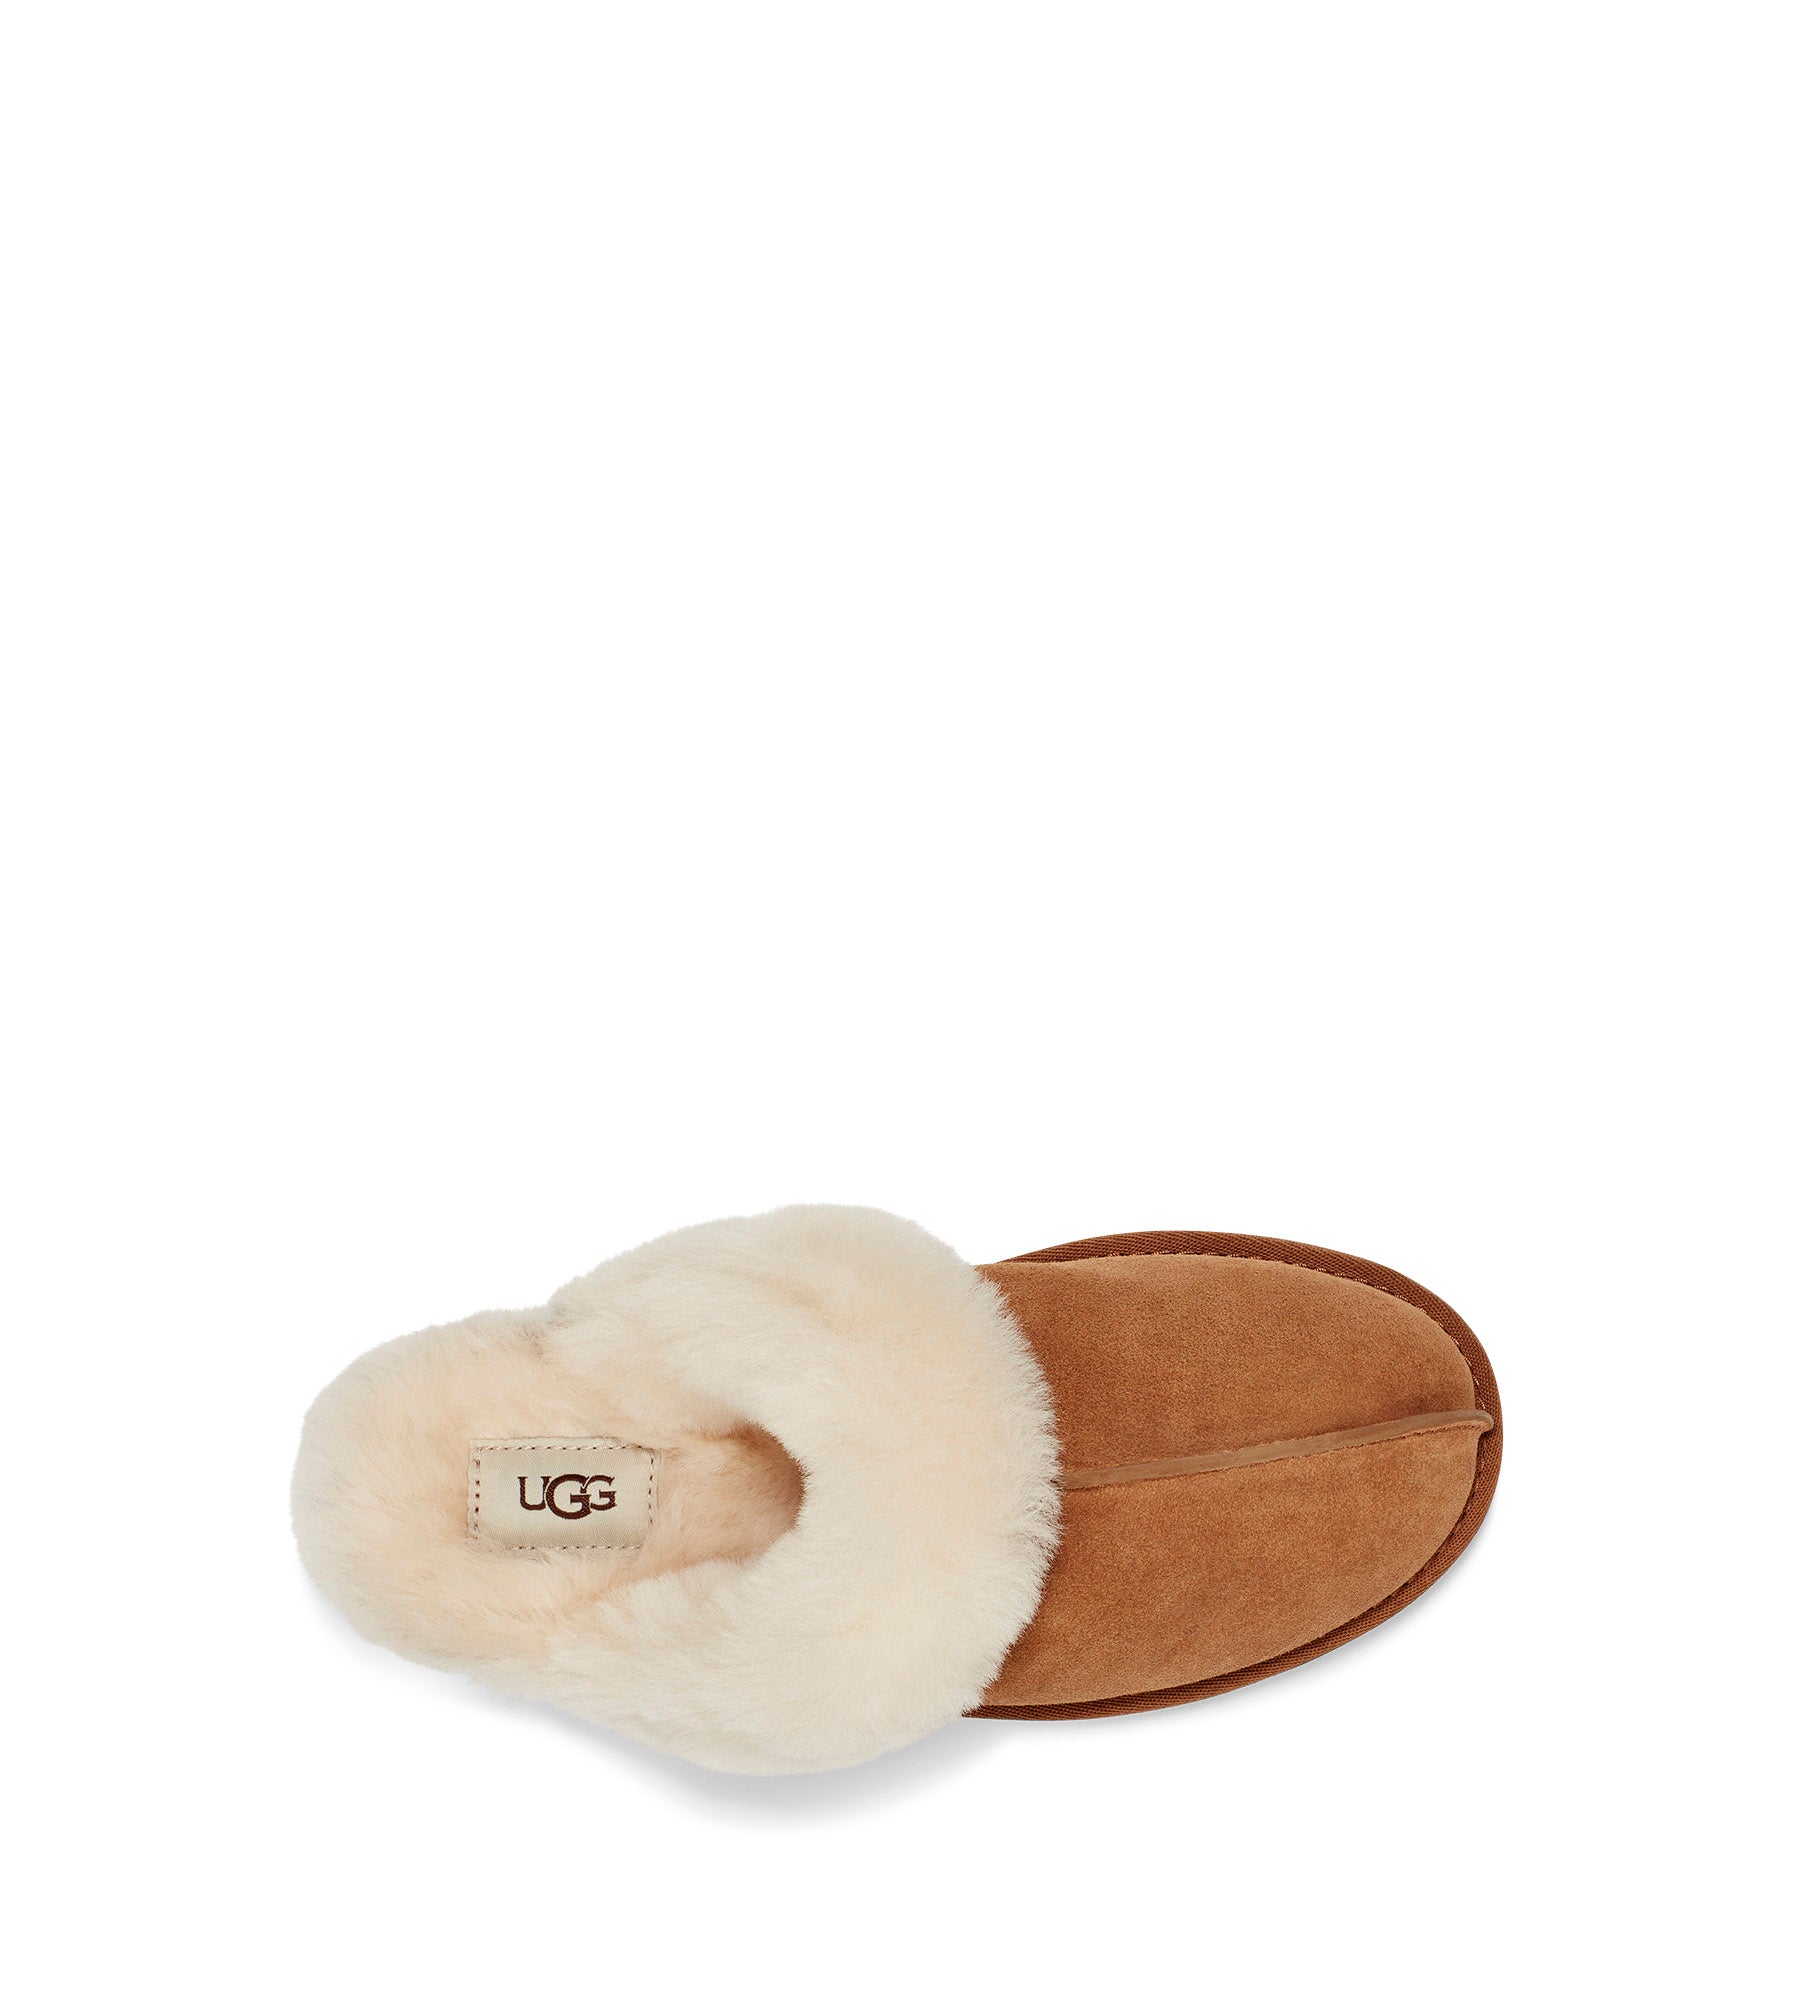 The Women's Ugg Scuffette 2 is an essential house slipper cast in soft suede with plush wool lining. Pair with our cozy robes or matching cashmere sets for maximal leisure.  This colorway is in the ultra classic Chestnut.